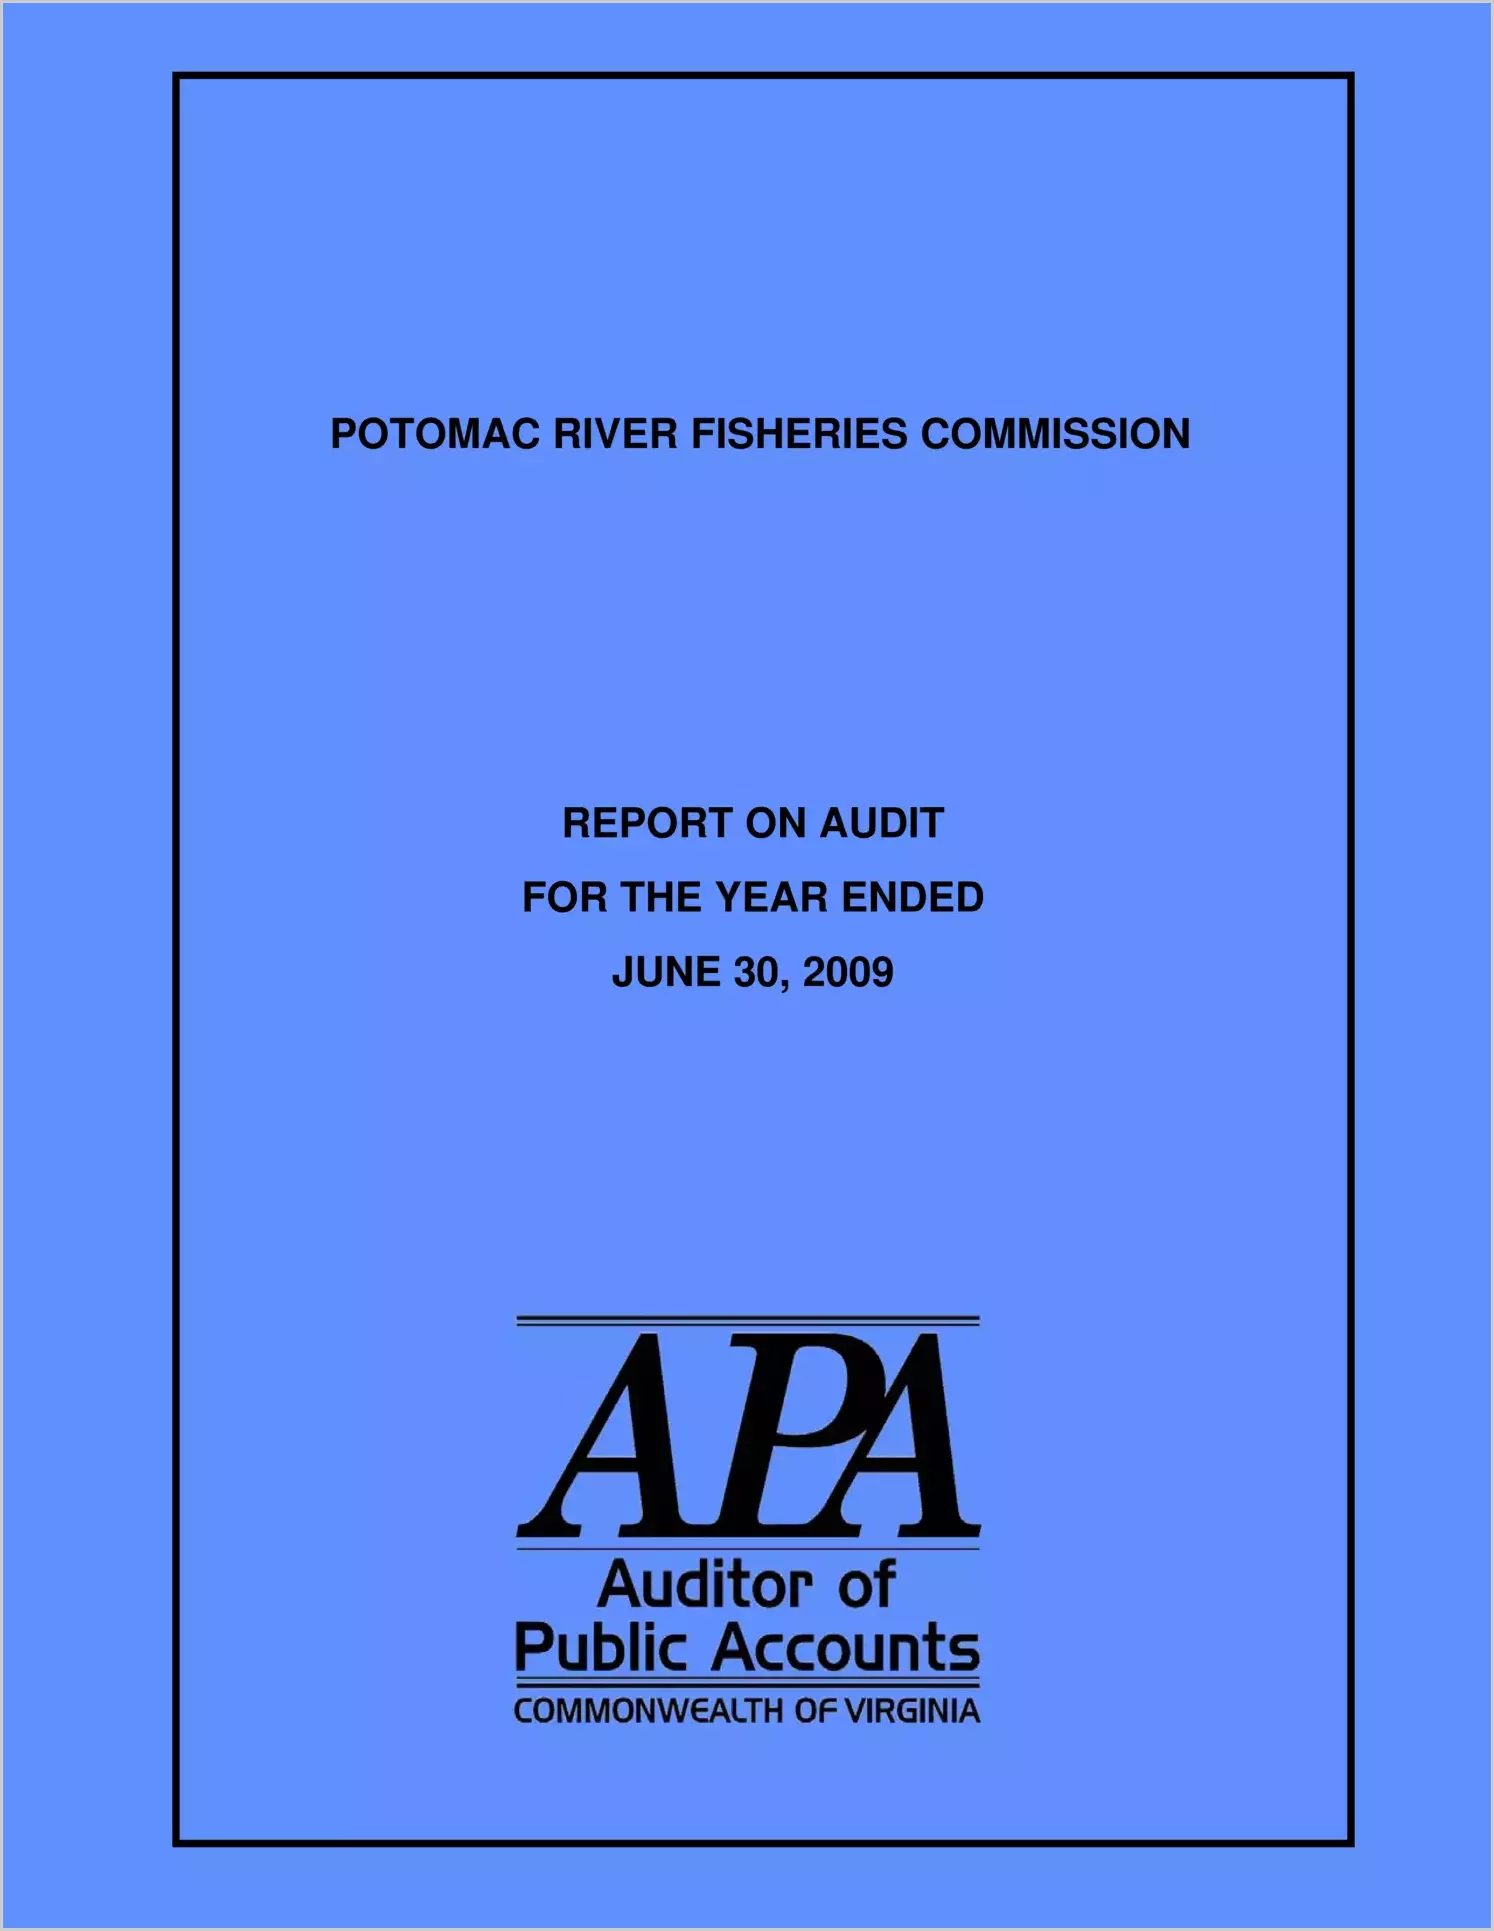 Potomac River Fisheries Commission report on audit for the year ended June 30, 2009